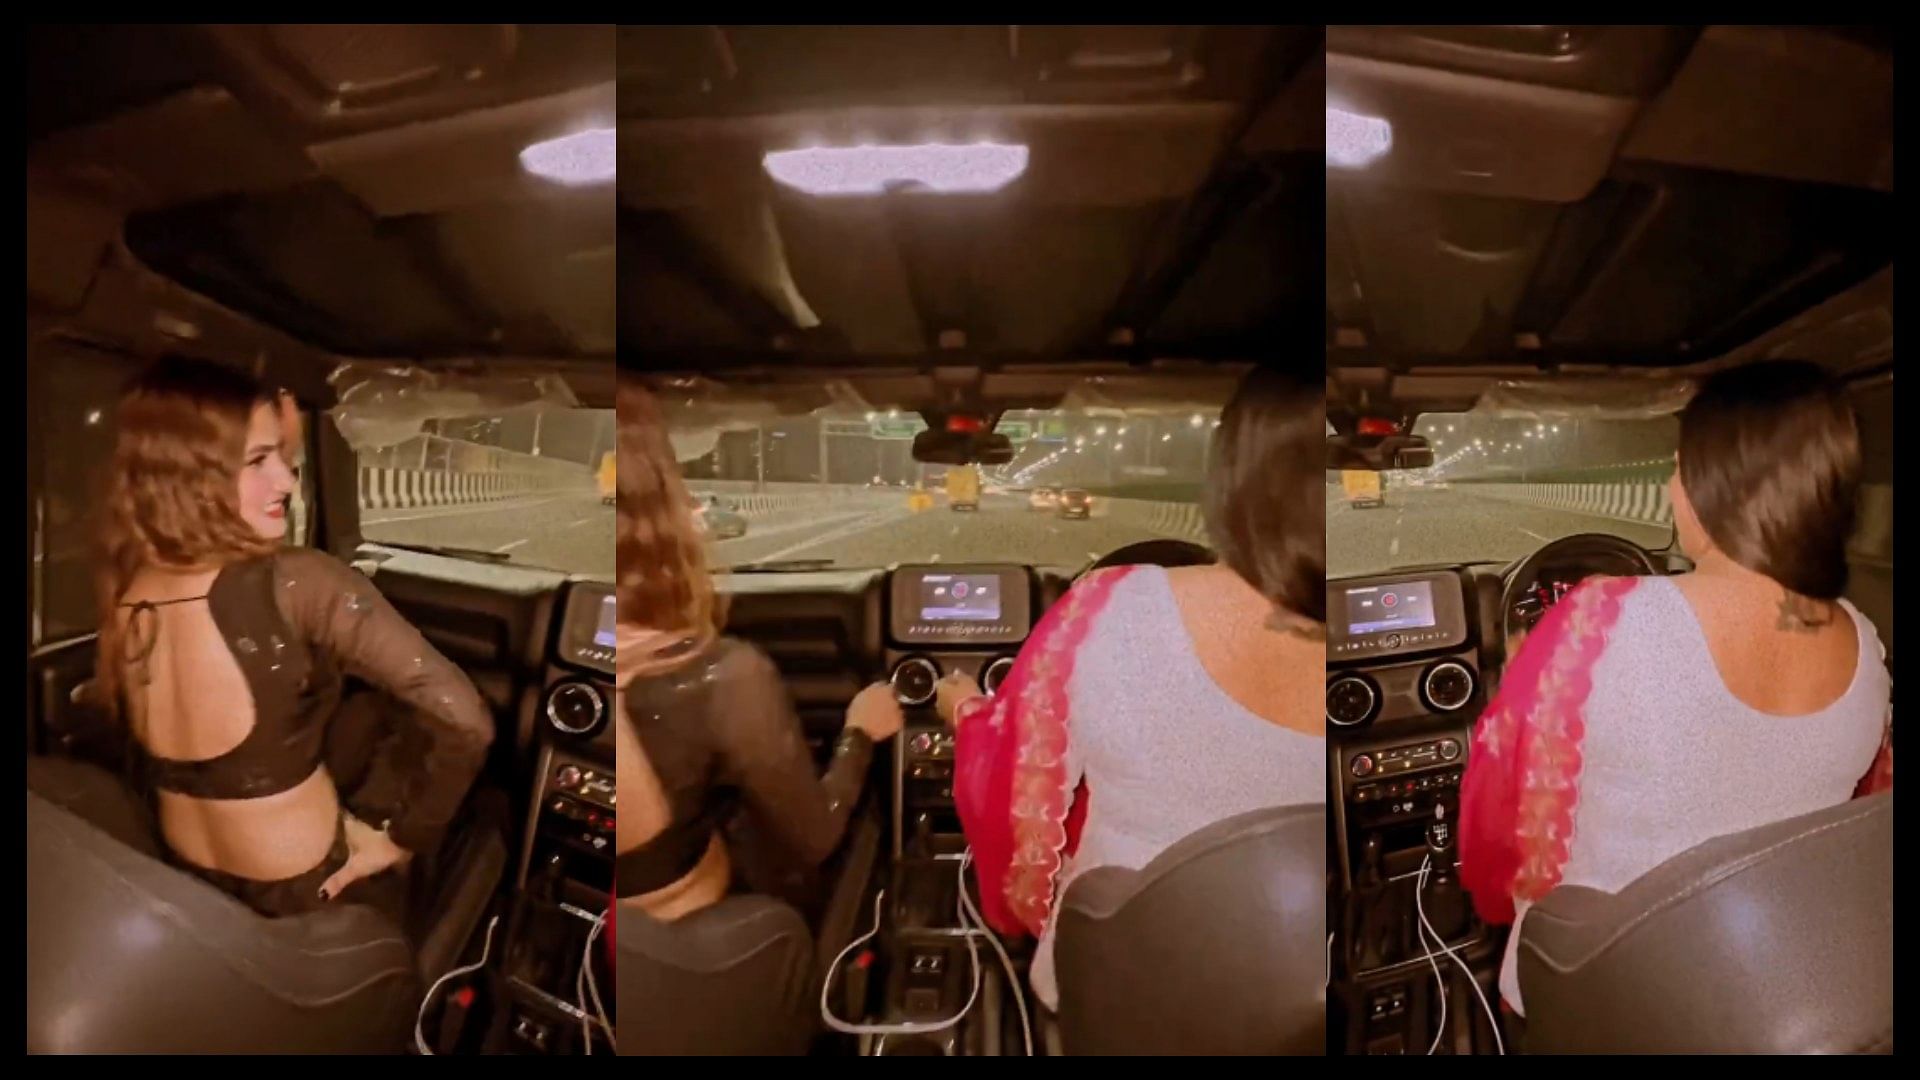 Women dancing while driving a car video went viral on social media